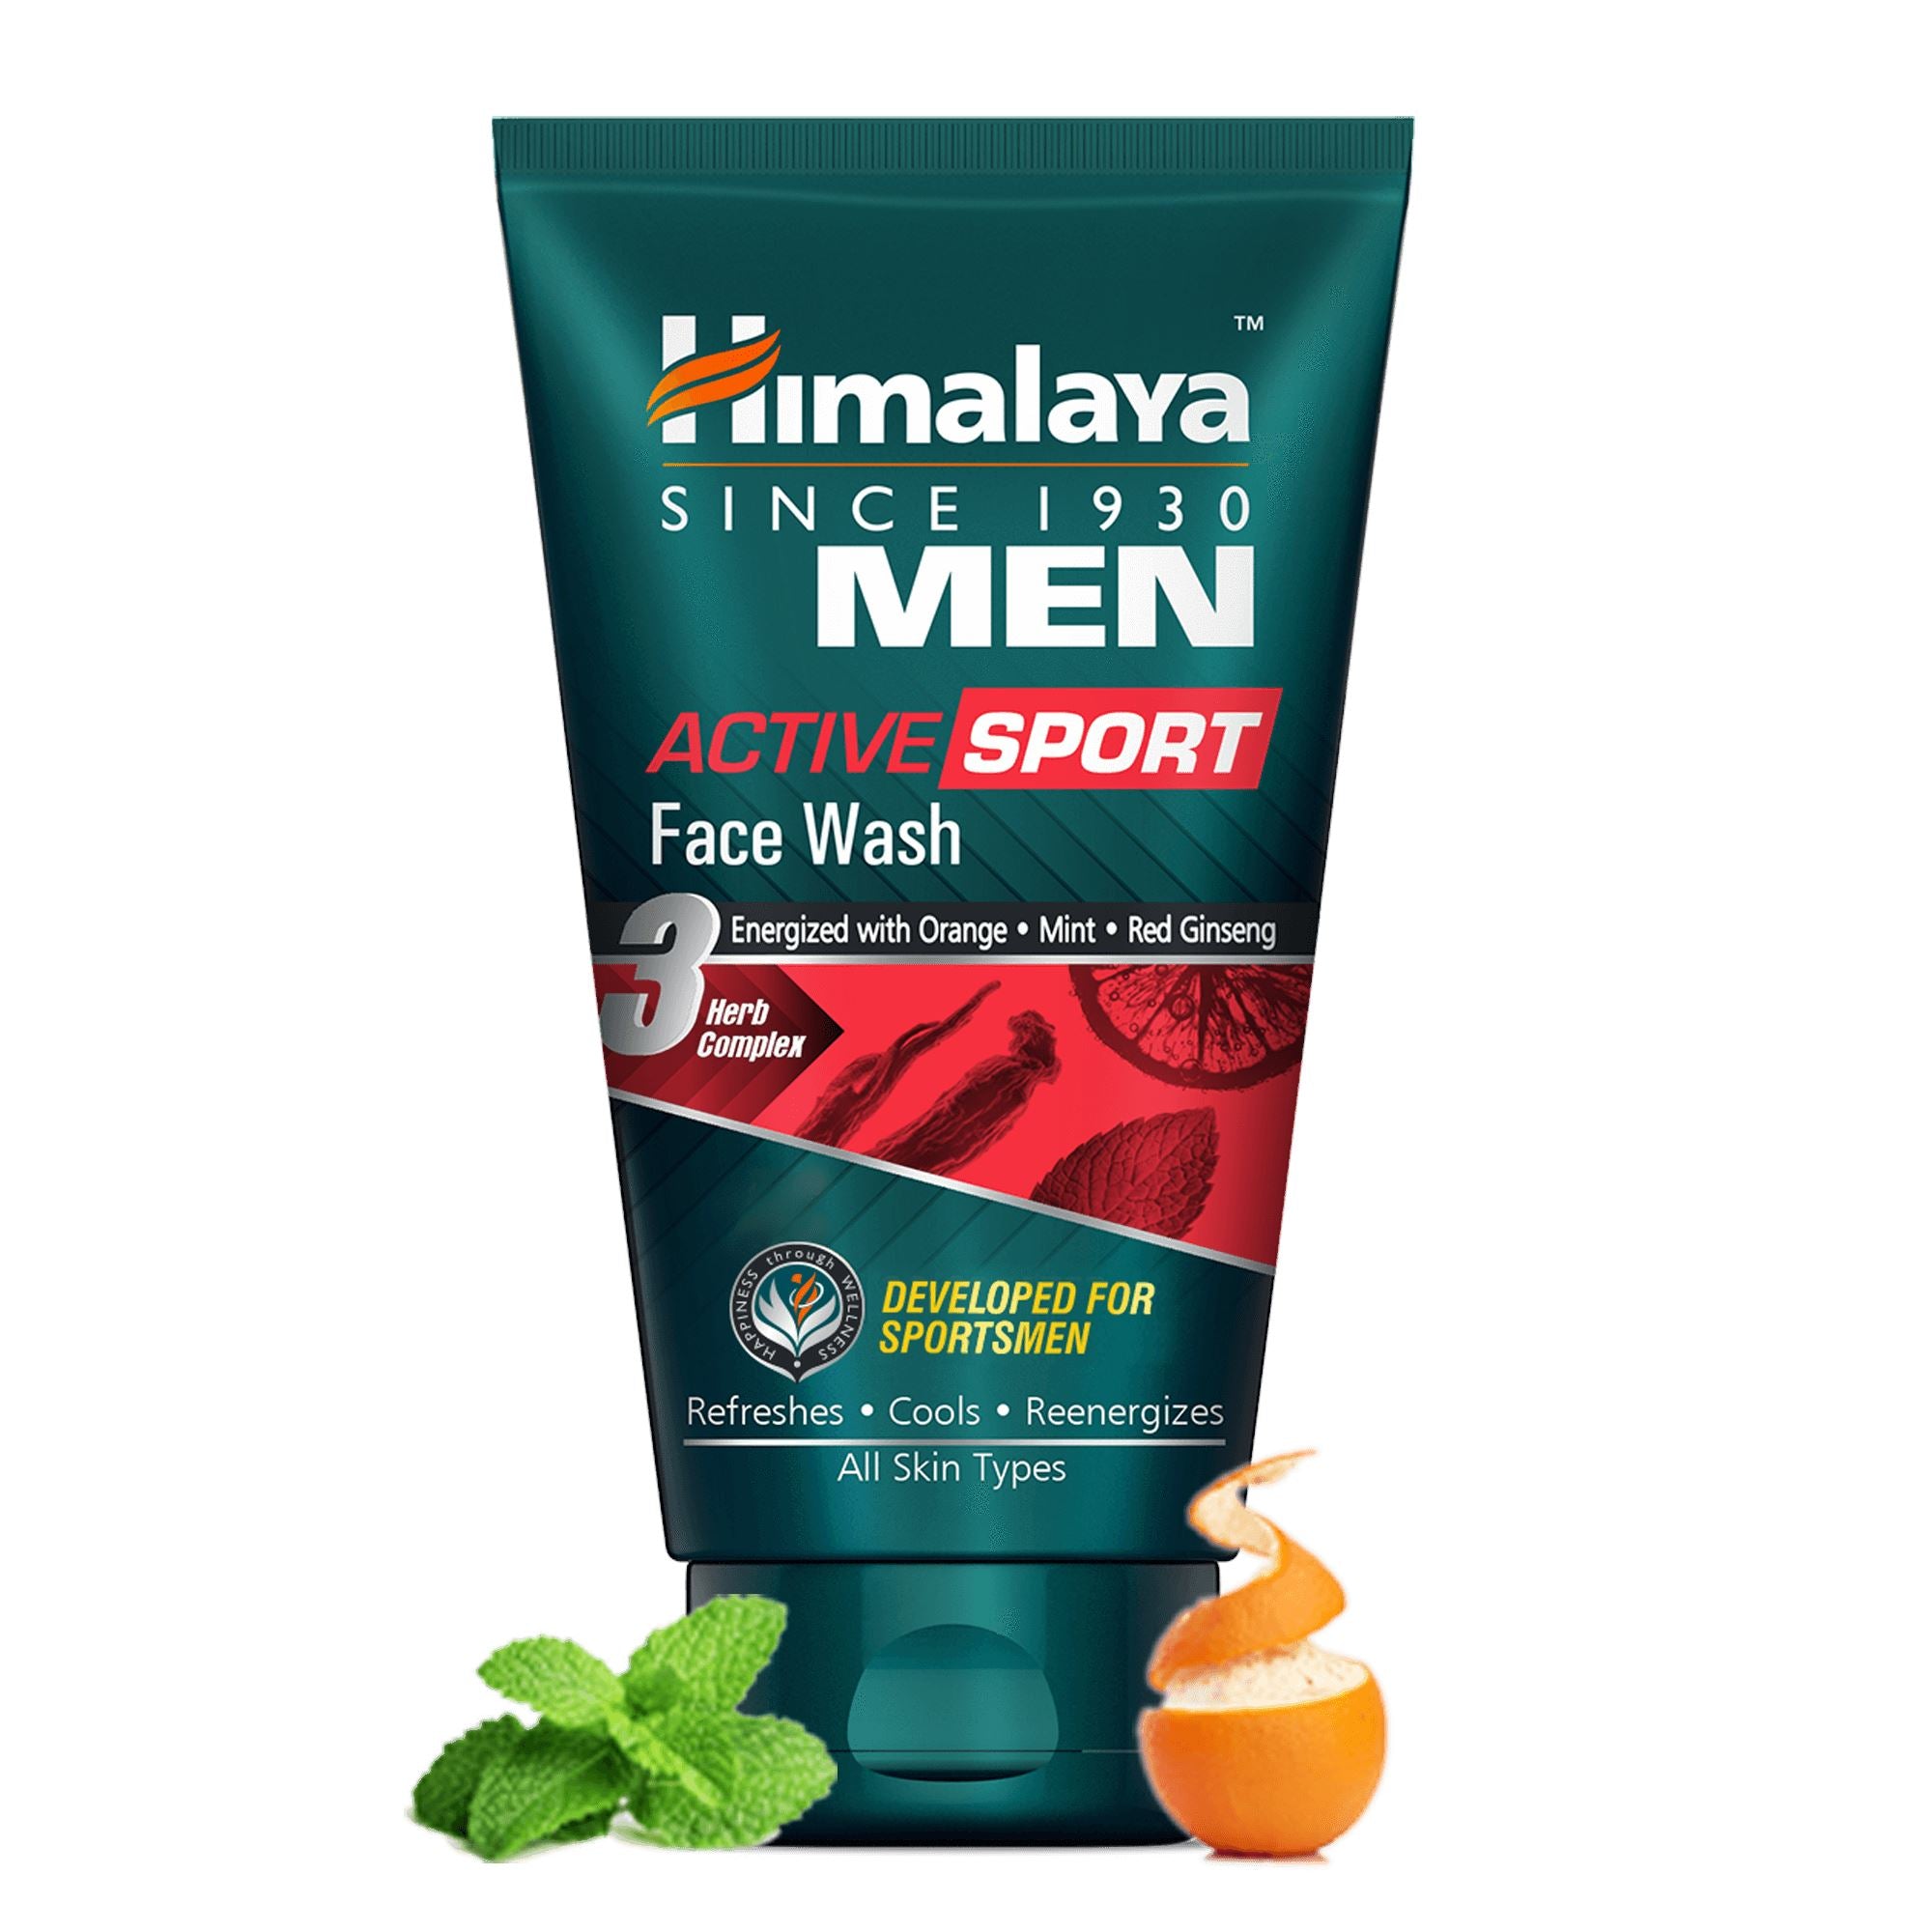 Himalaya MEN ACTIVE SPORT Face Wash - Helps remove oil, sweat, and dirt